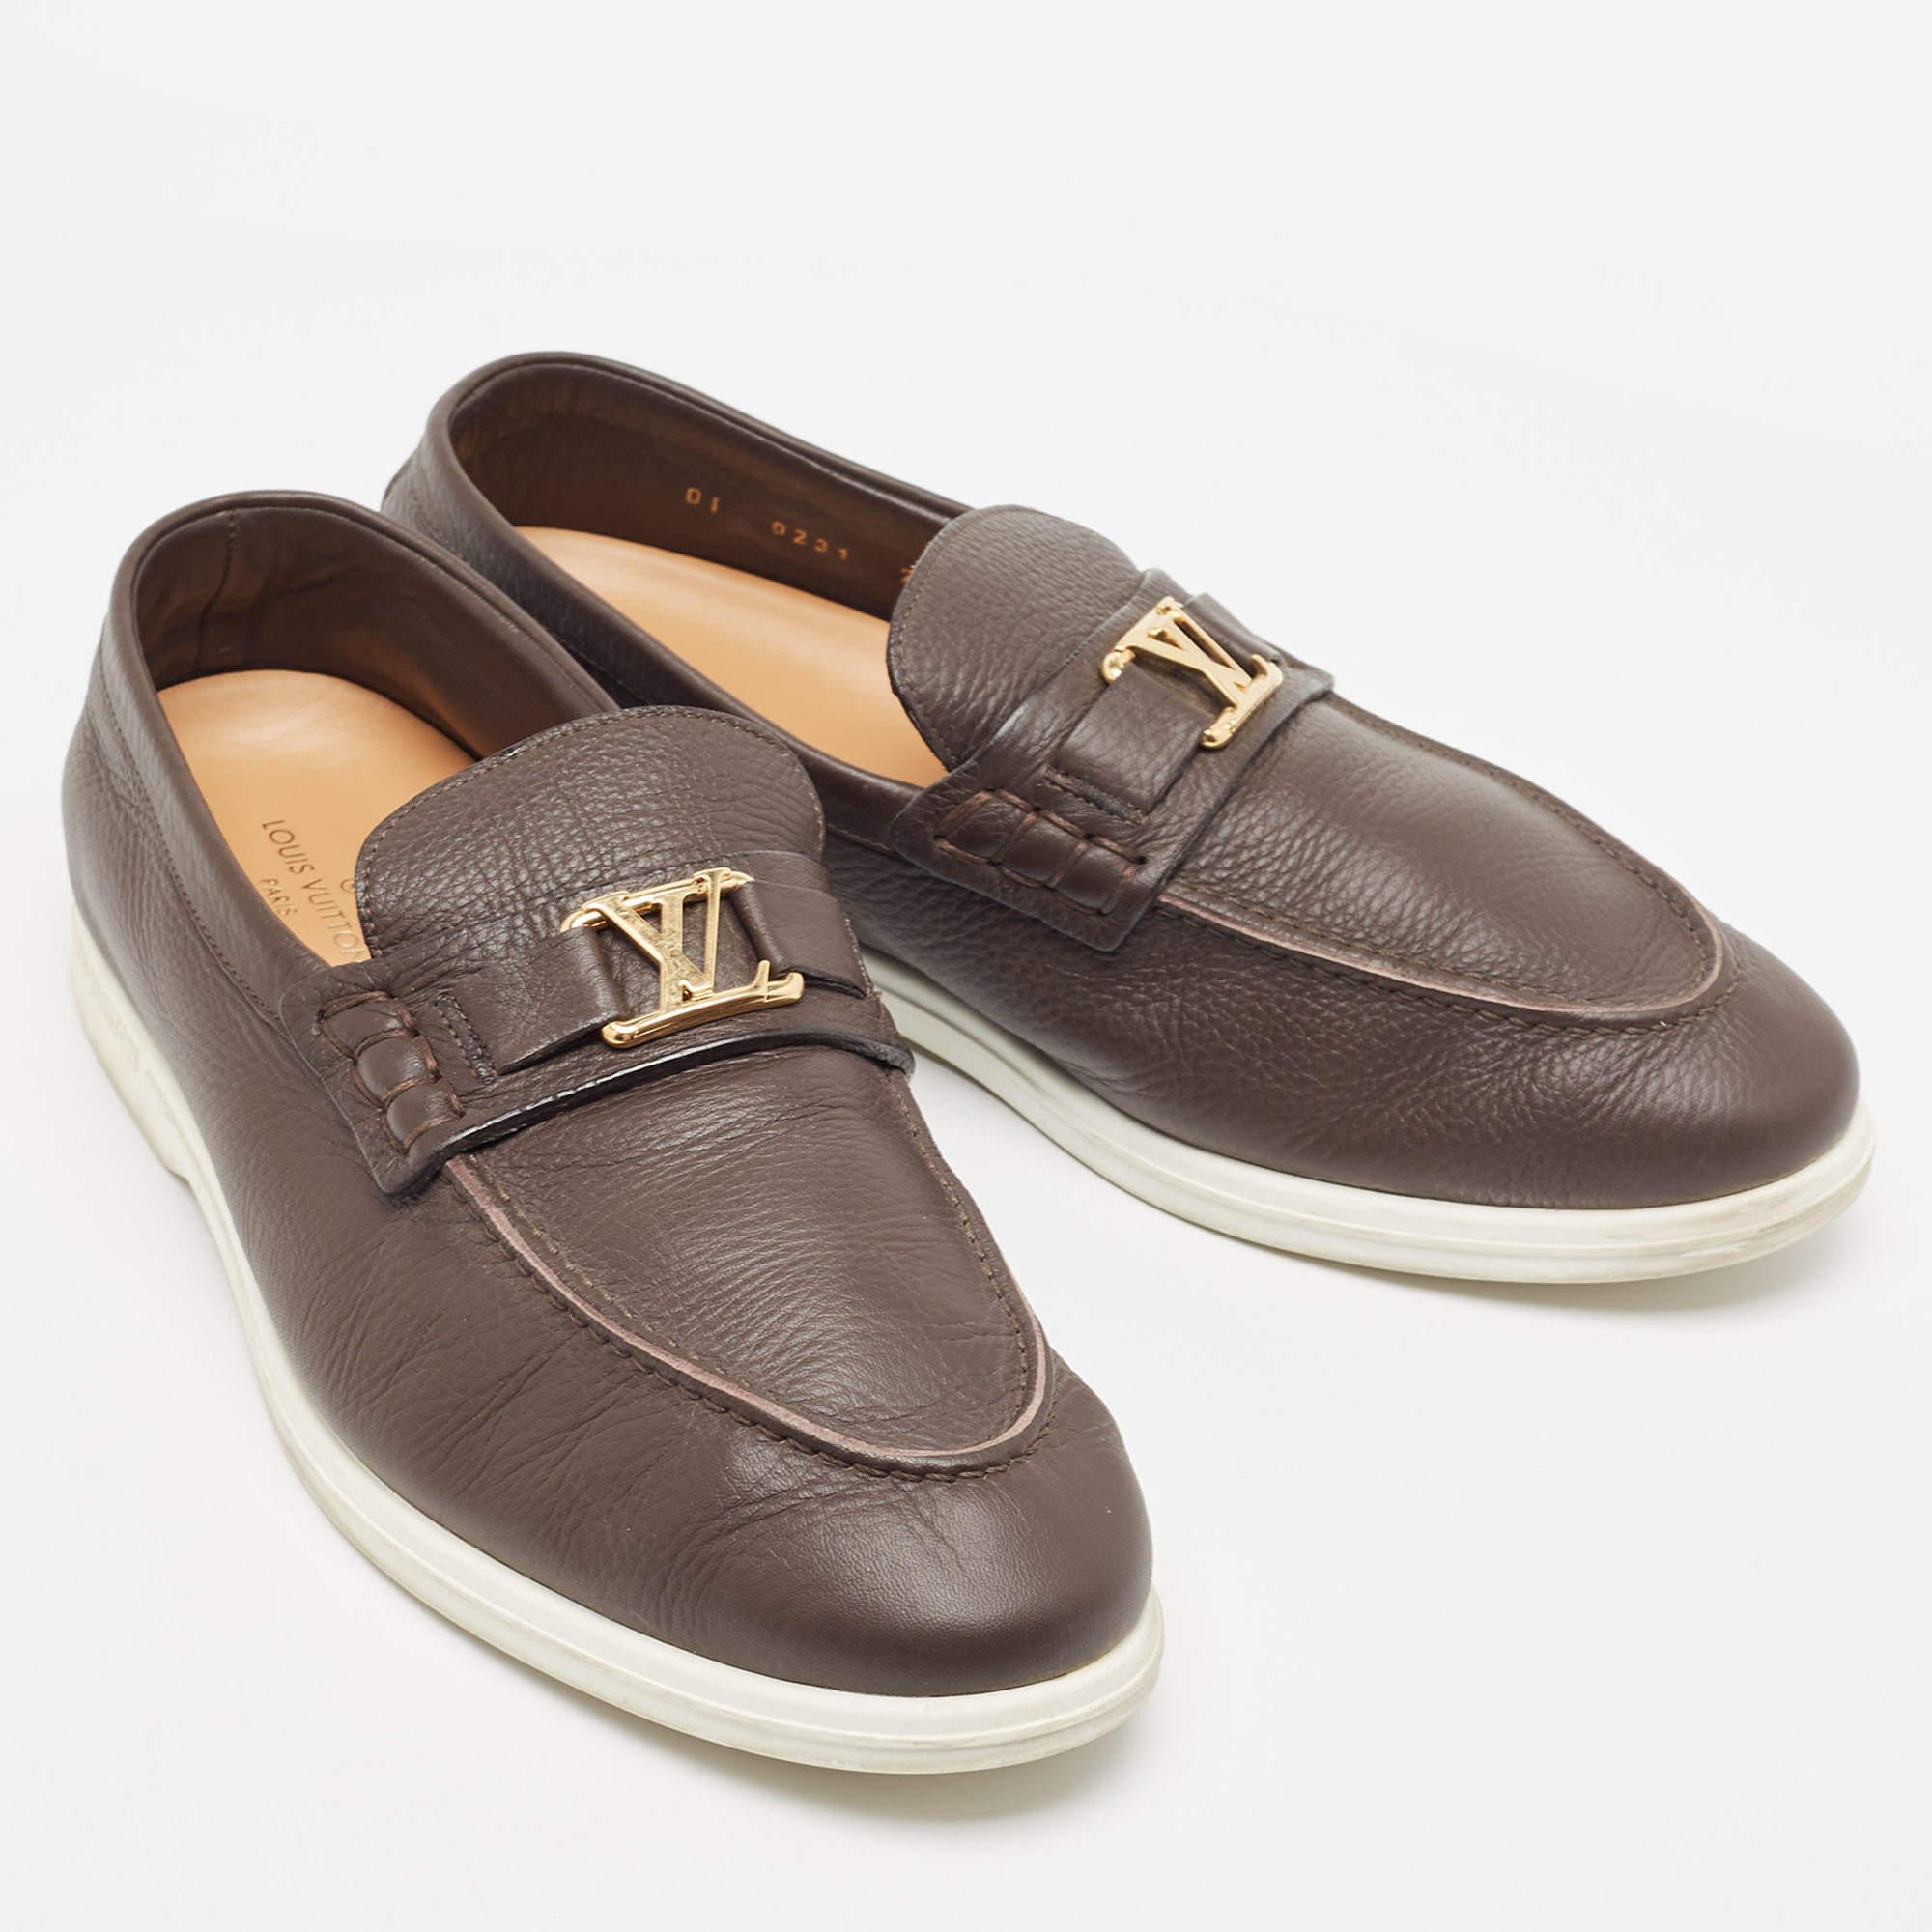 Louis Vuitton Brown Leather Slip On Loafers Size 41.5 In Good Condition For Sale In Dubai, Al Qouz 2